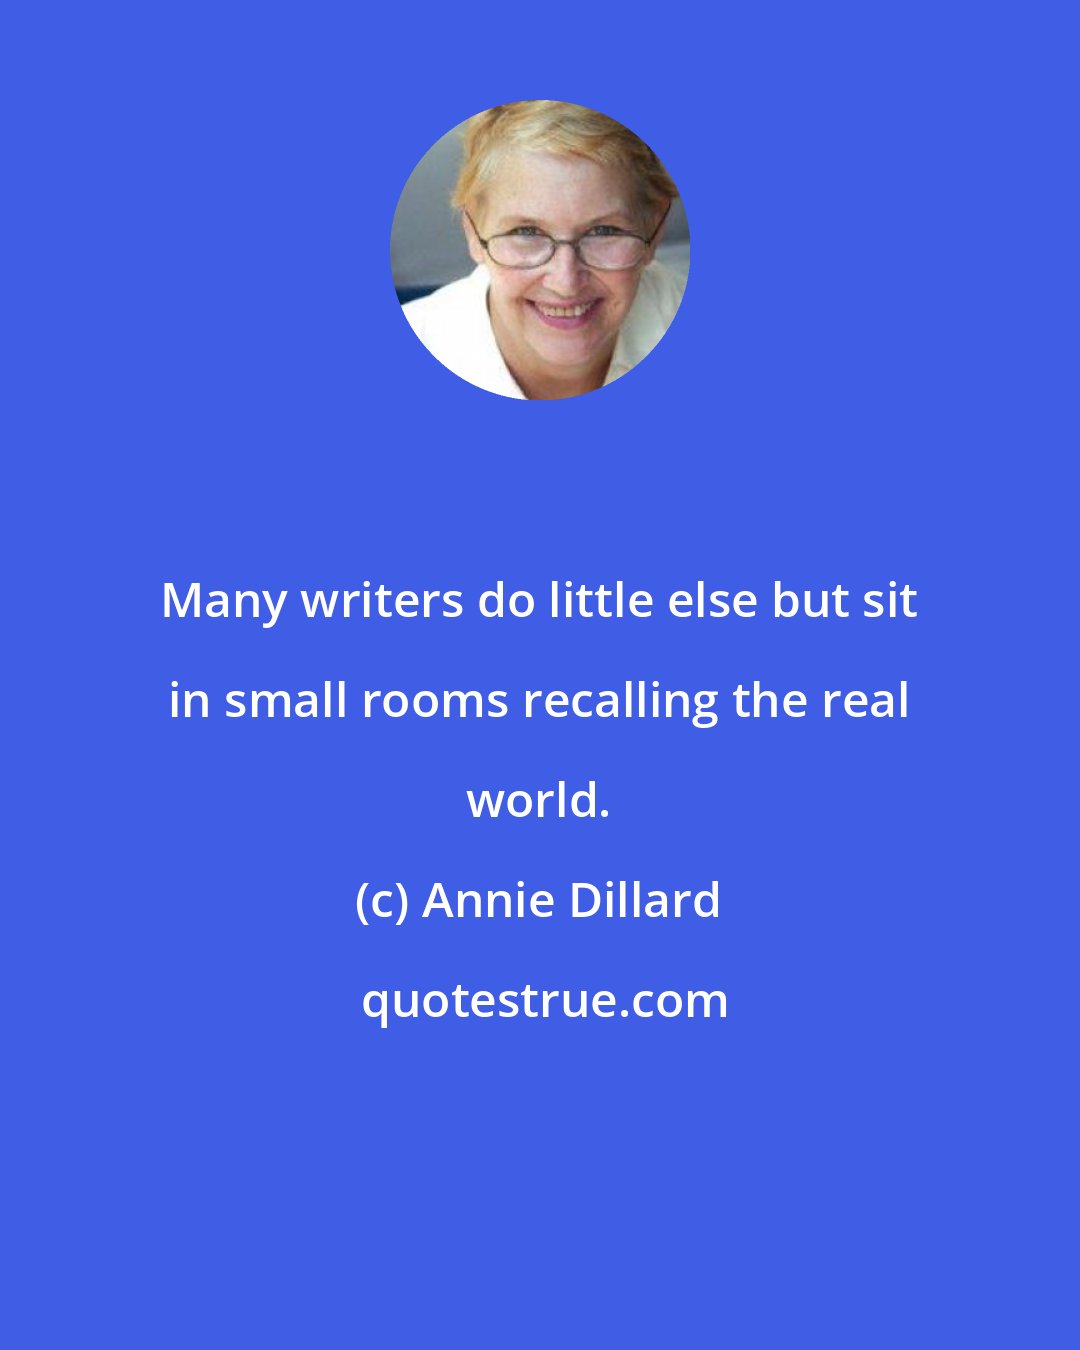 Annie Dillard: Many writers do little else but sit in small rooms recalling the real world.